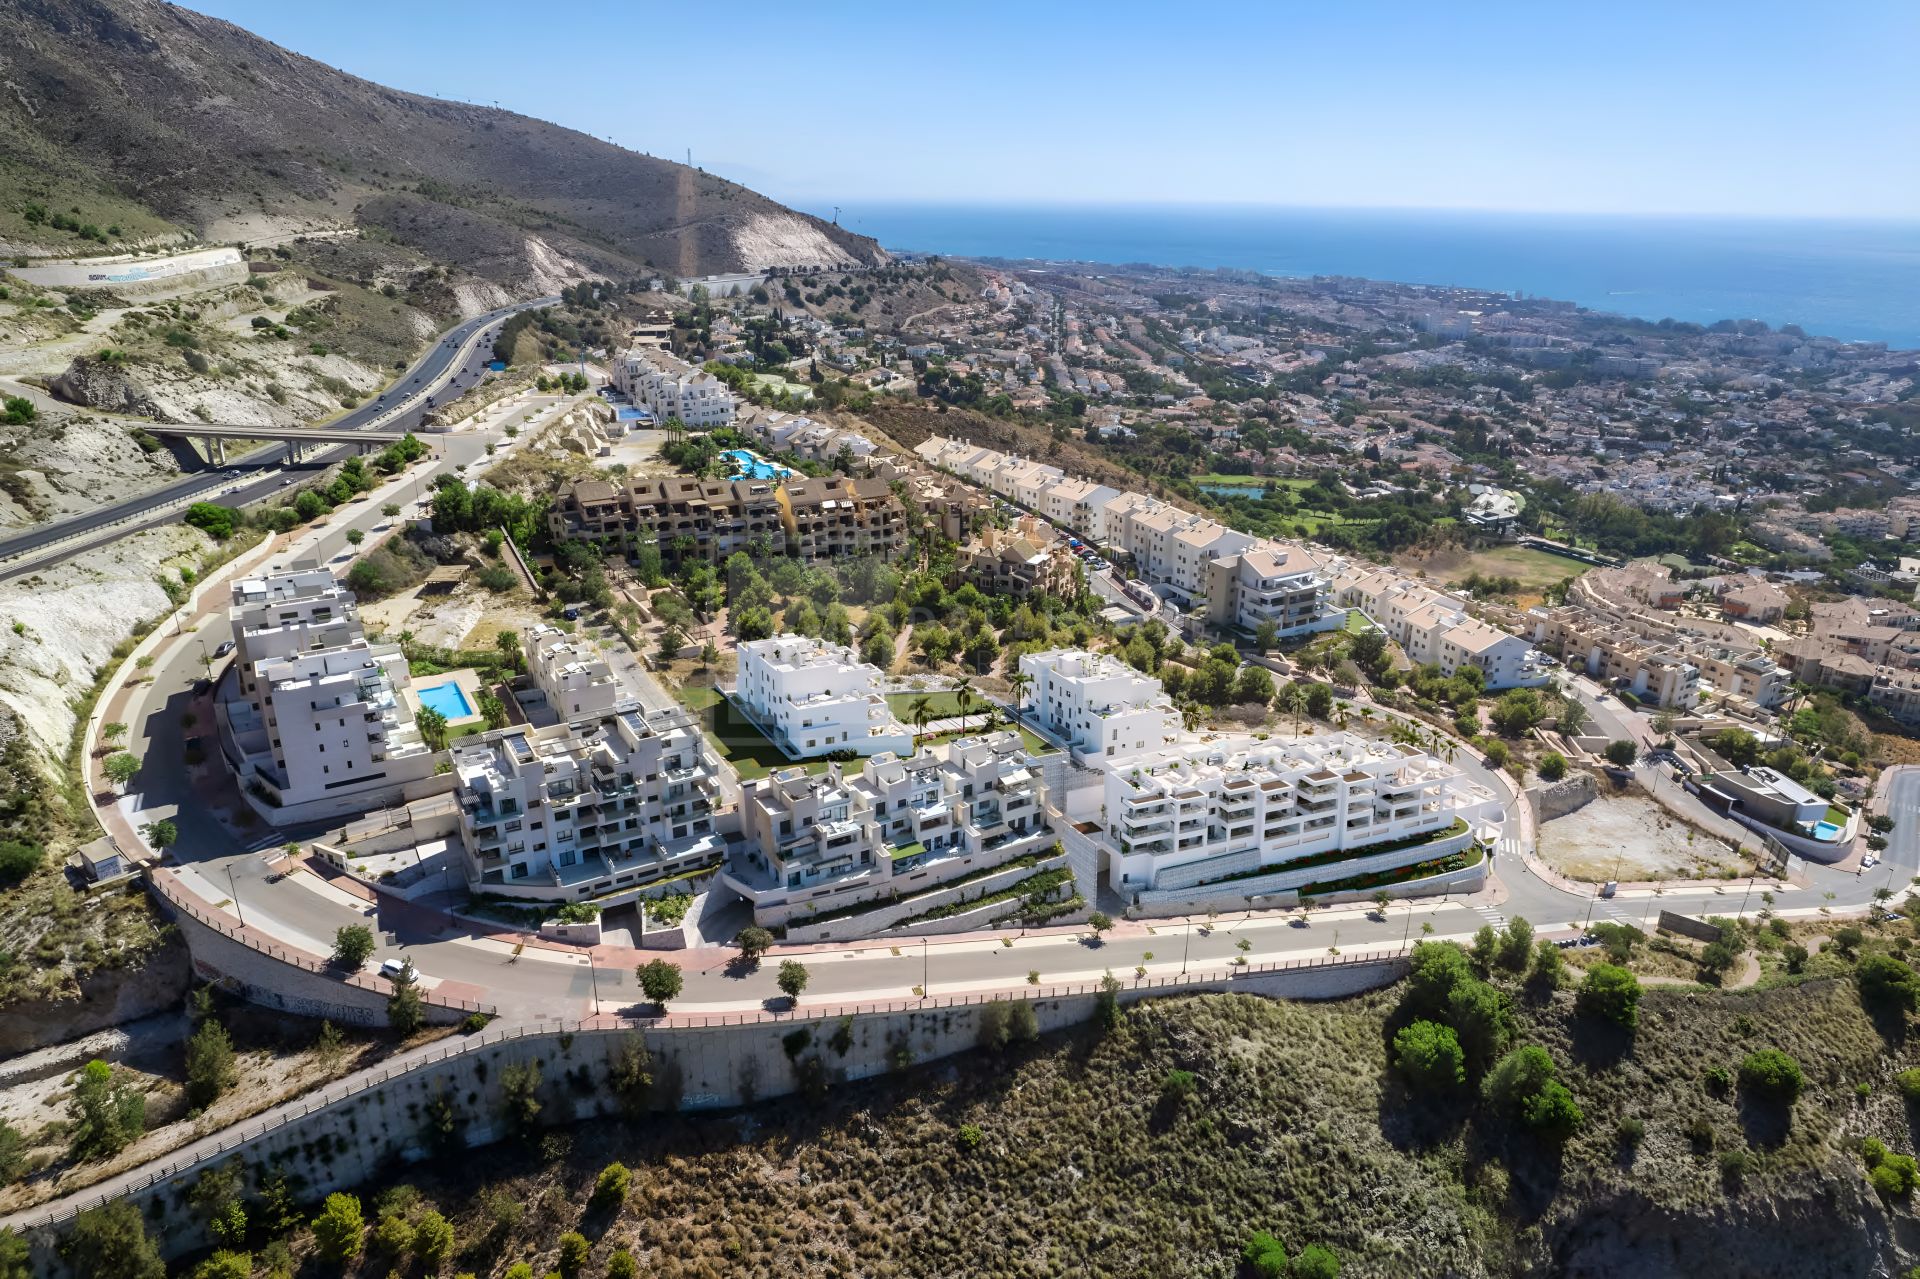 SPECIAL 3 BEDROOM APARTMENT WITH PANORAMIC SEA VIEWS IN BENALMADENA